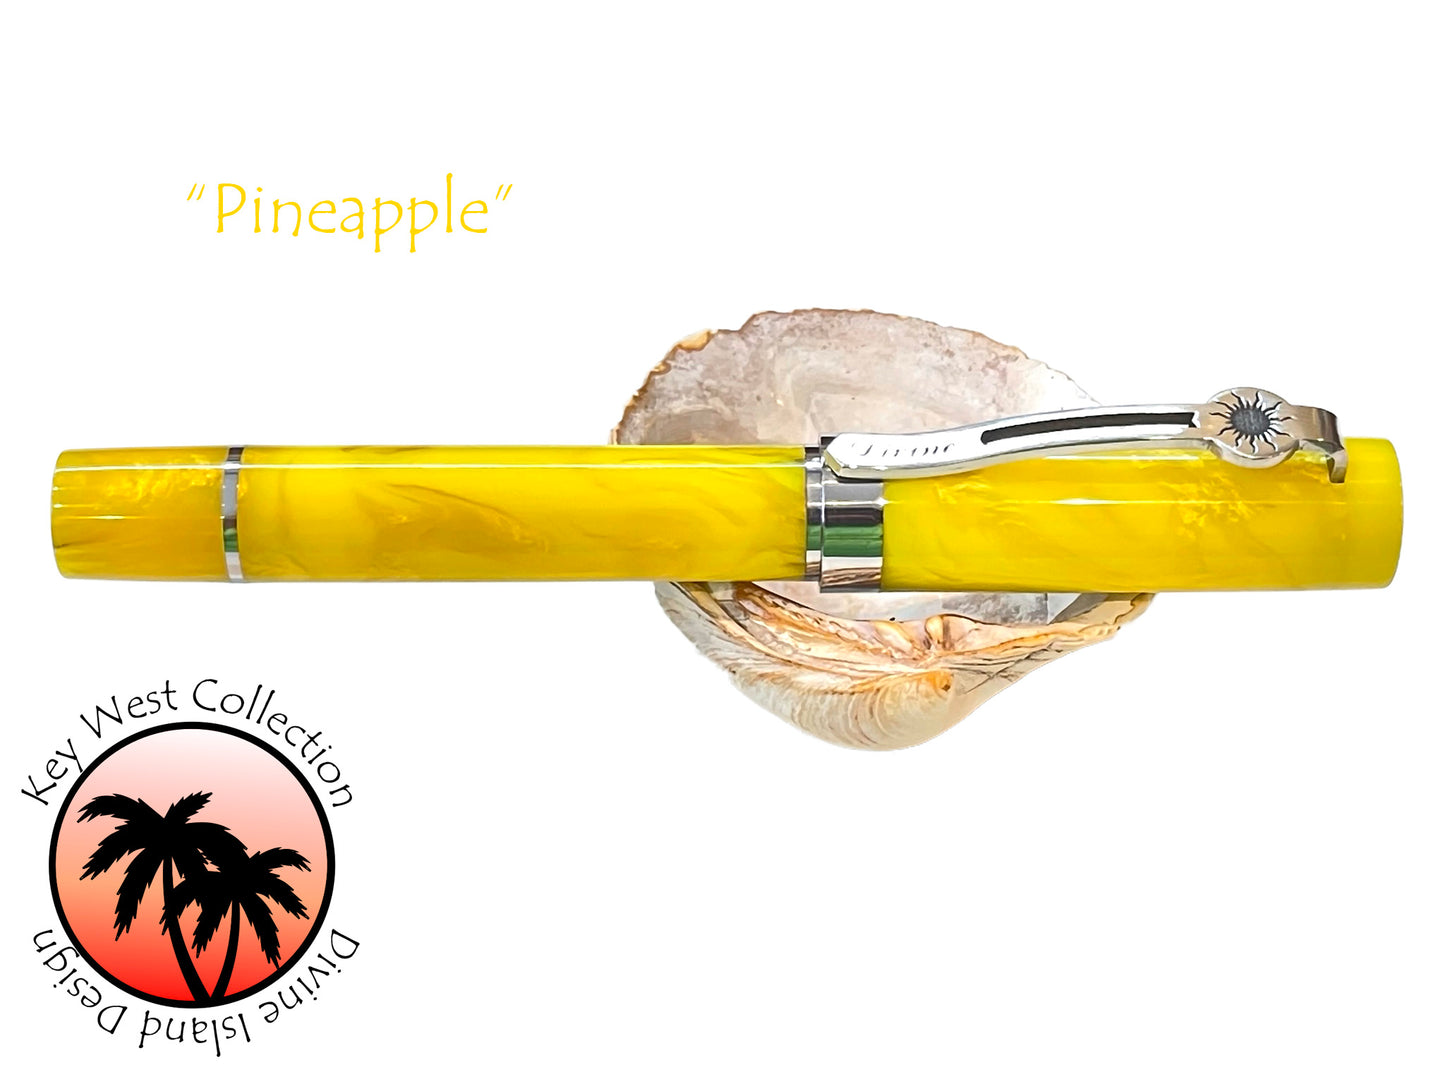 Key West Collection - "Pineapple"